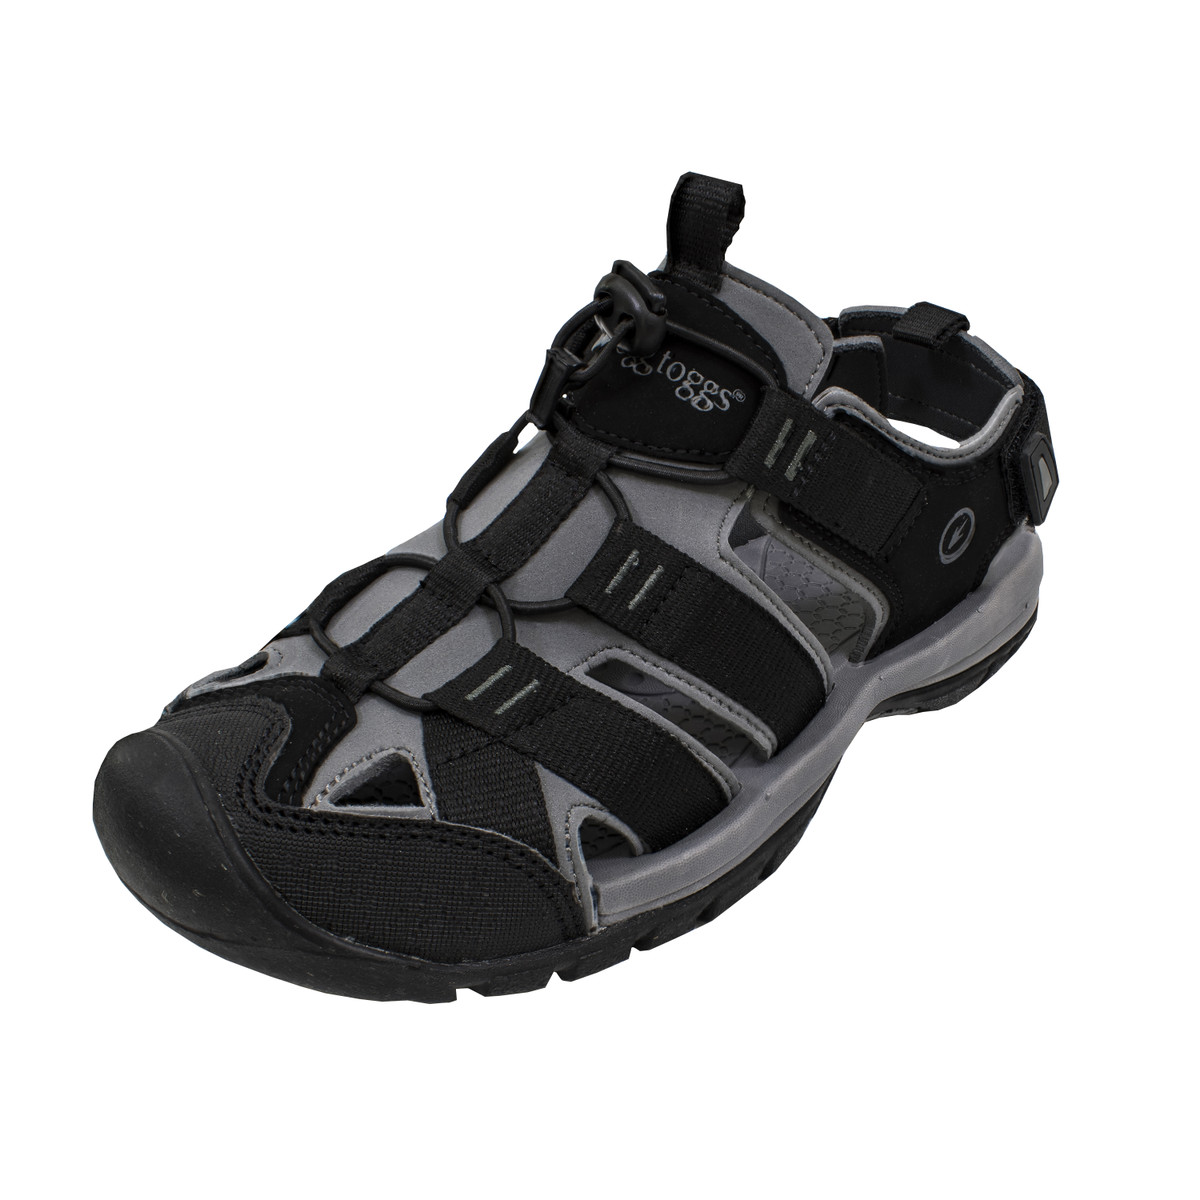 Frogg Toggs Men's River Sandal Shoe #4RS011 - Dunns Sporting Goods